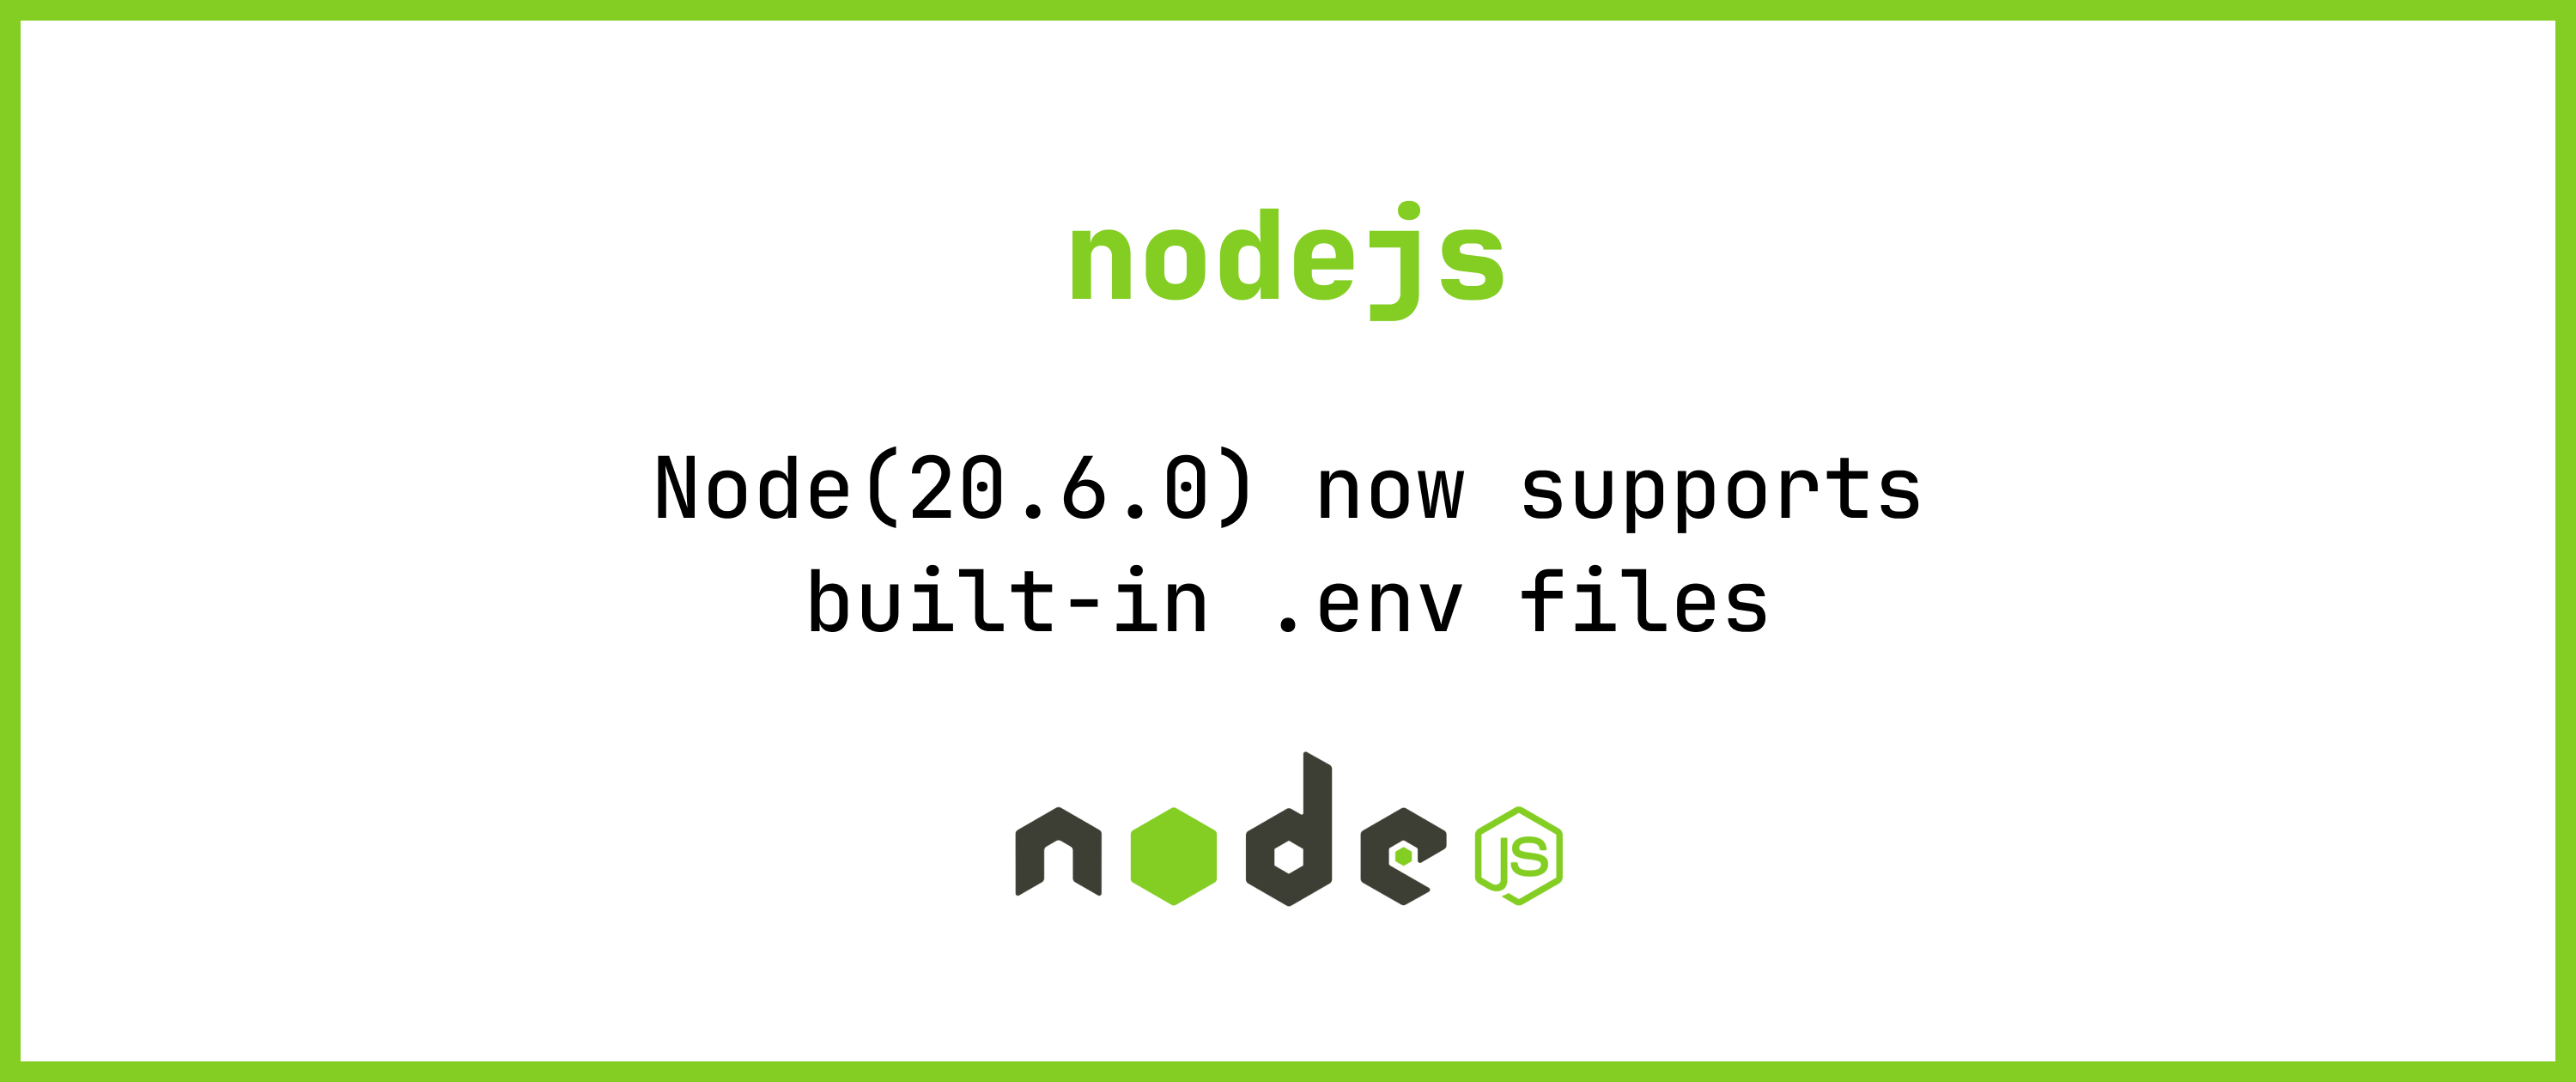 Node(20.6.0) now supports built-in .env files